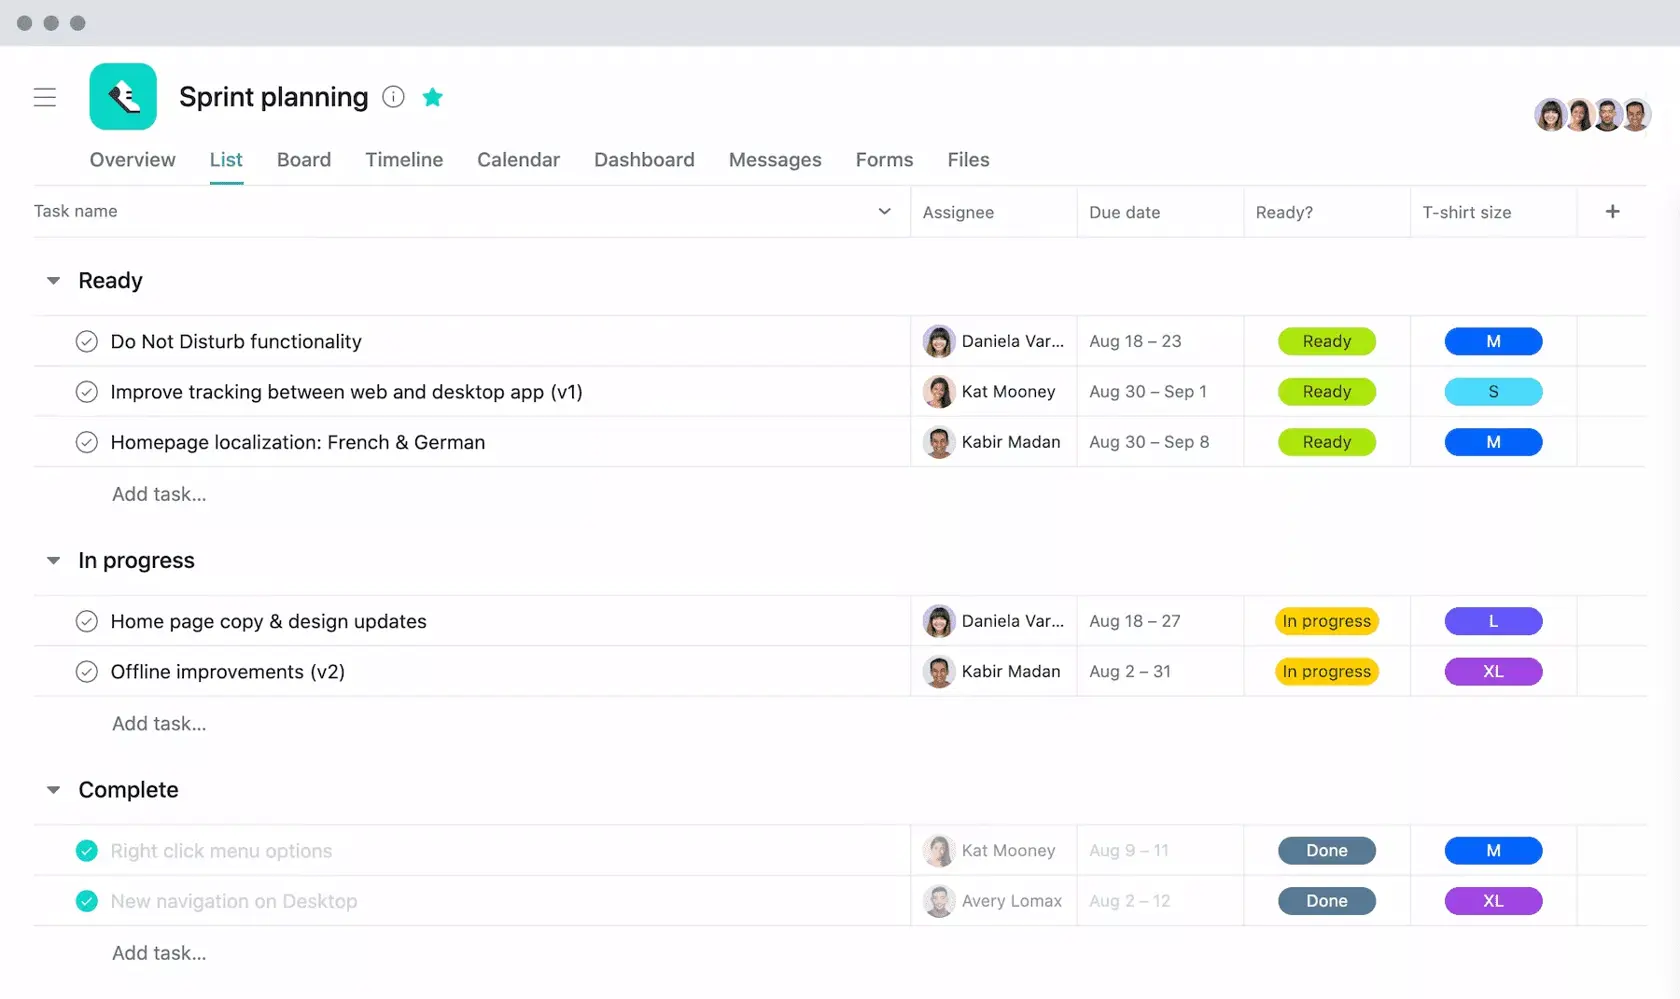 [Old Product UI] Sprint planning project with t-shirt sizes in Asana (Lists)